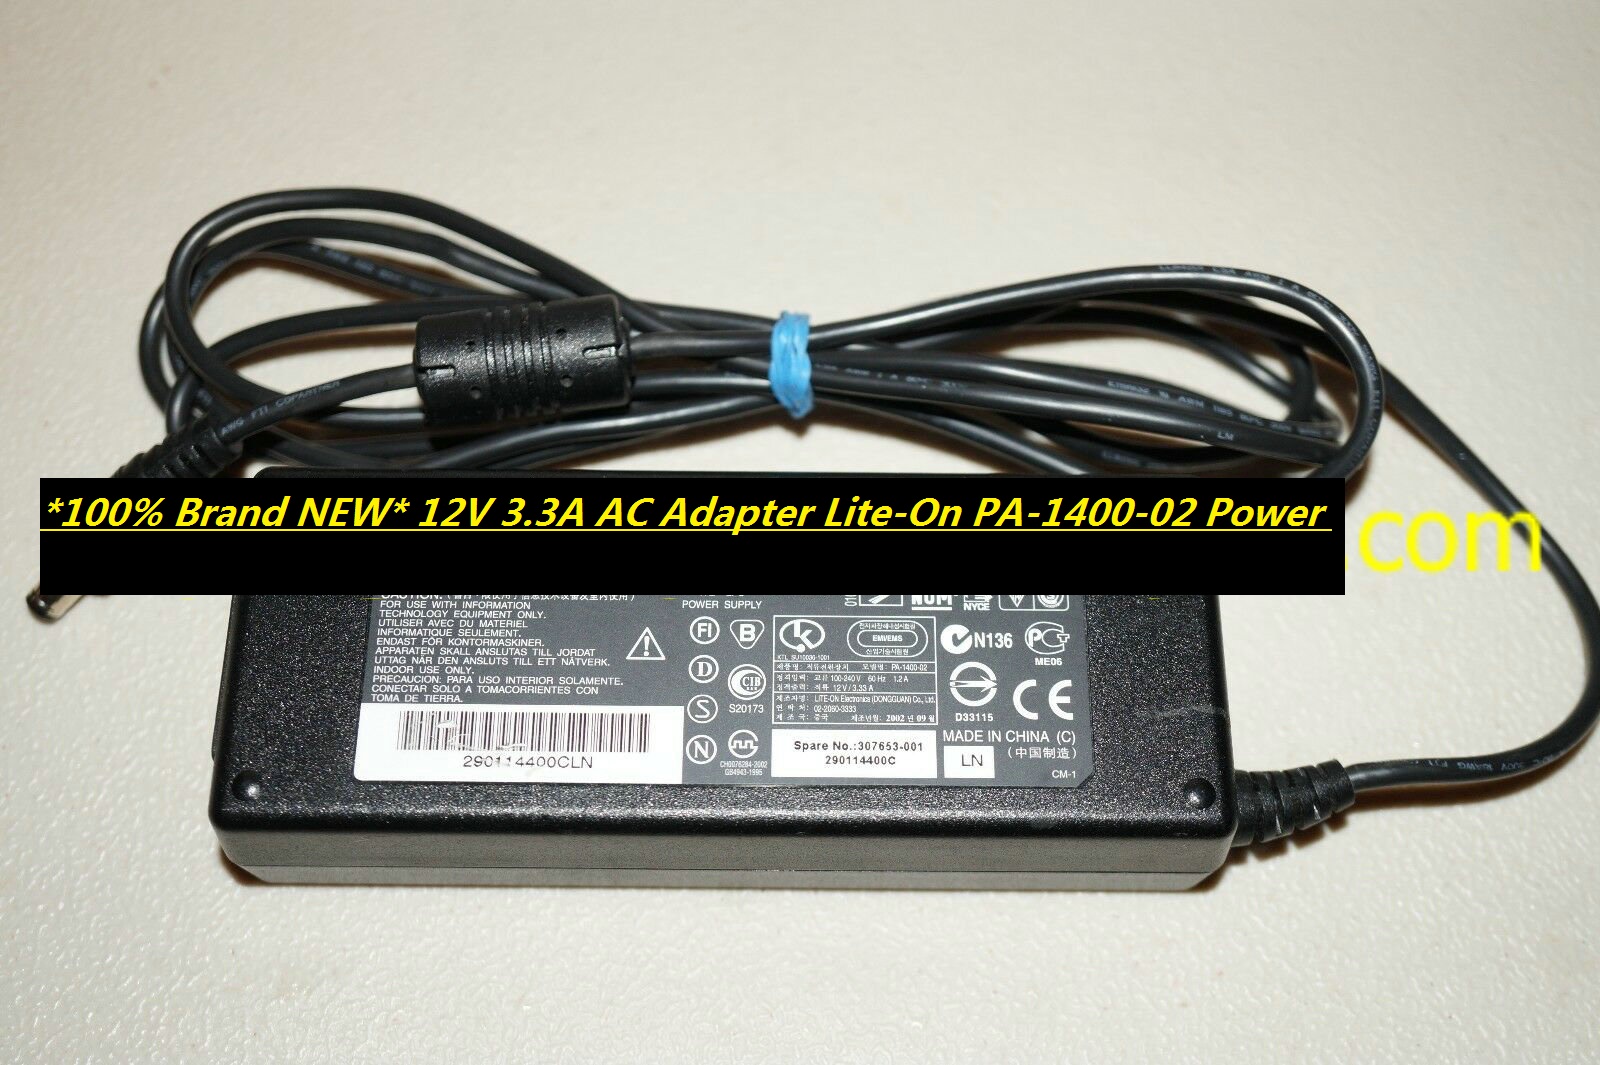 *100% Brand NEW* 12V 3.3A AC Adapter Lite-On PA-1400-02 Power Supply - Click Image to Close